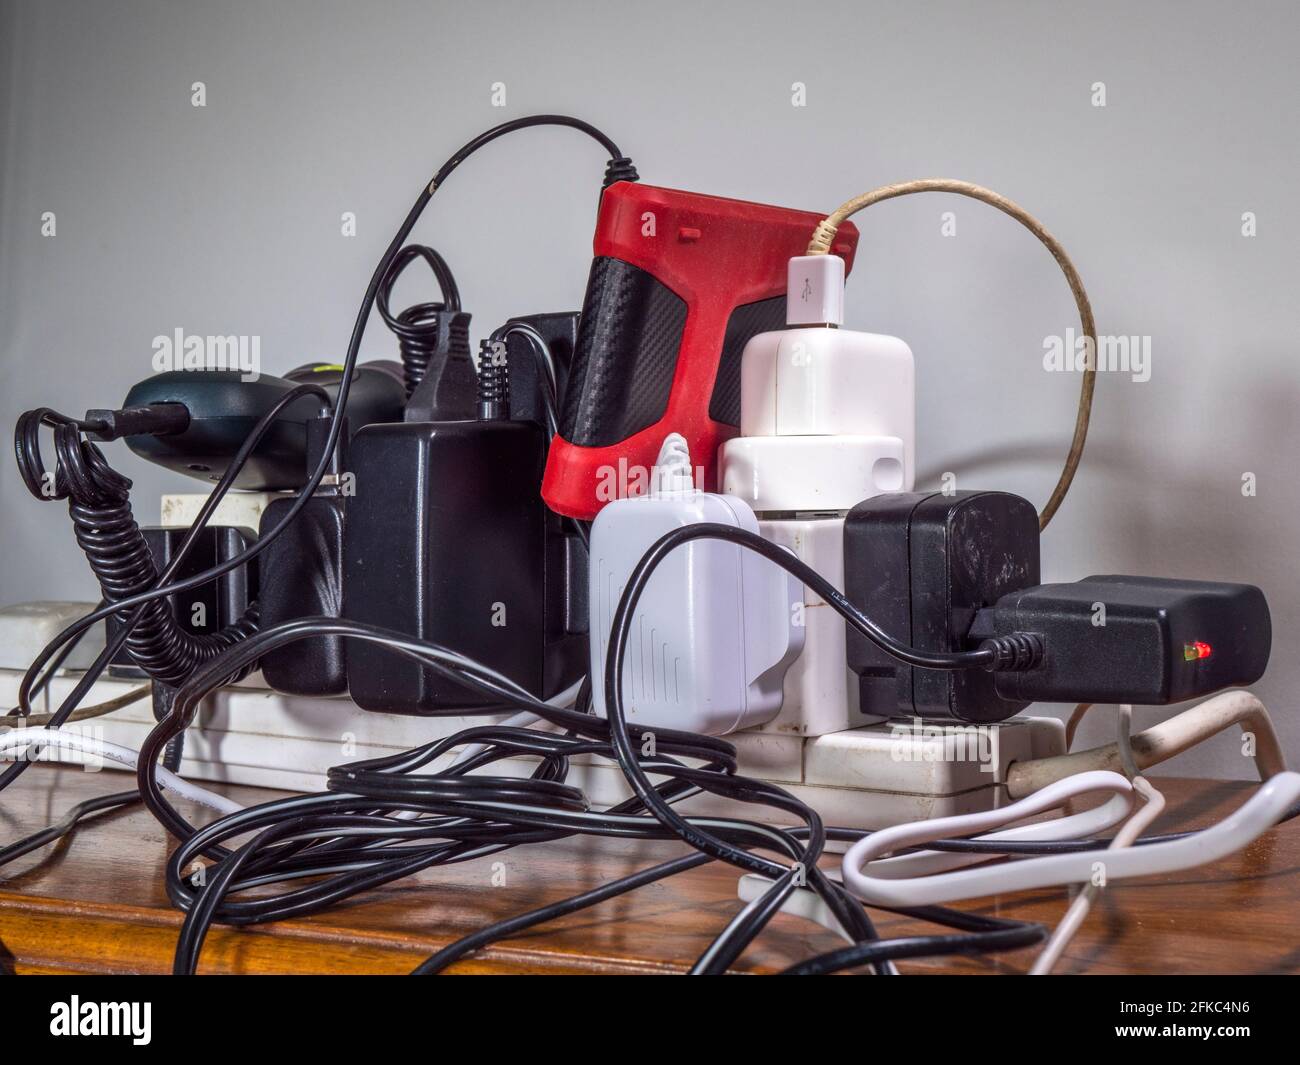 unsafe-overloaded-uk-240-volt-electricity-supply-with-a-mess-of-plugs-sockets-extensions-wires-and-cables-all-plugged-into-an-extension-board-2FKC4N6.jpg